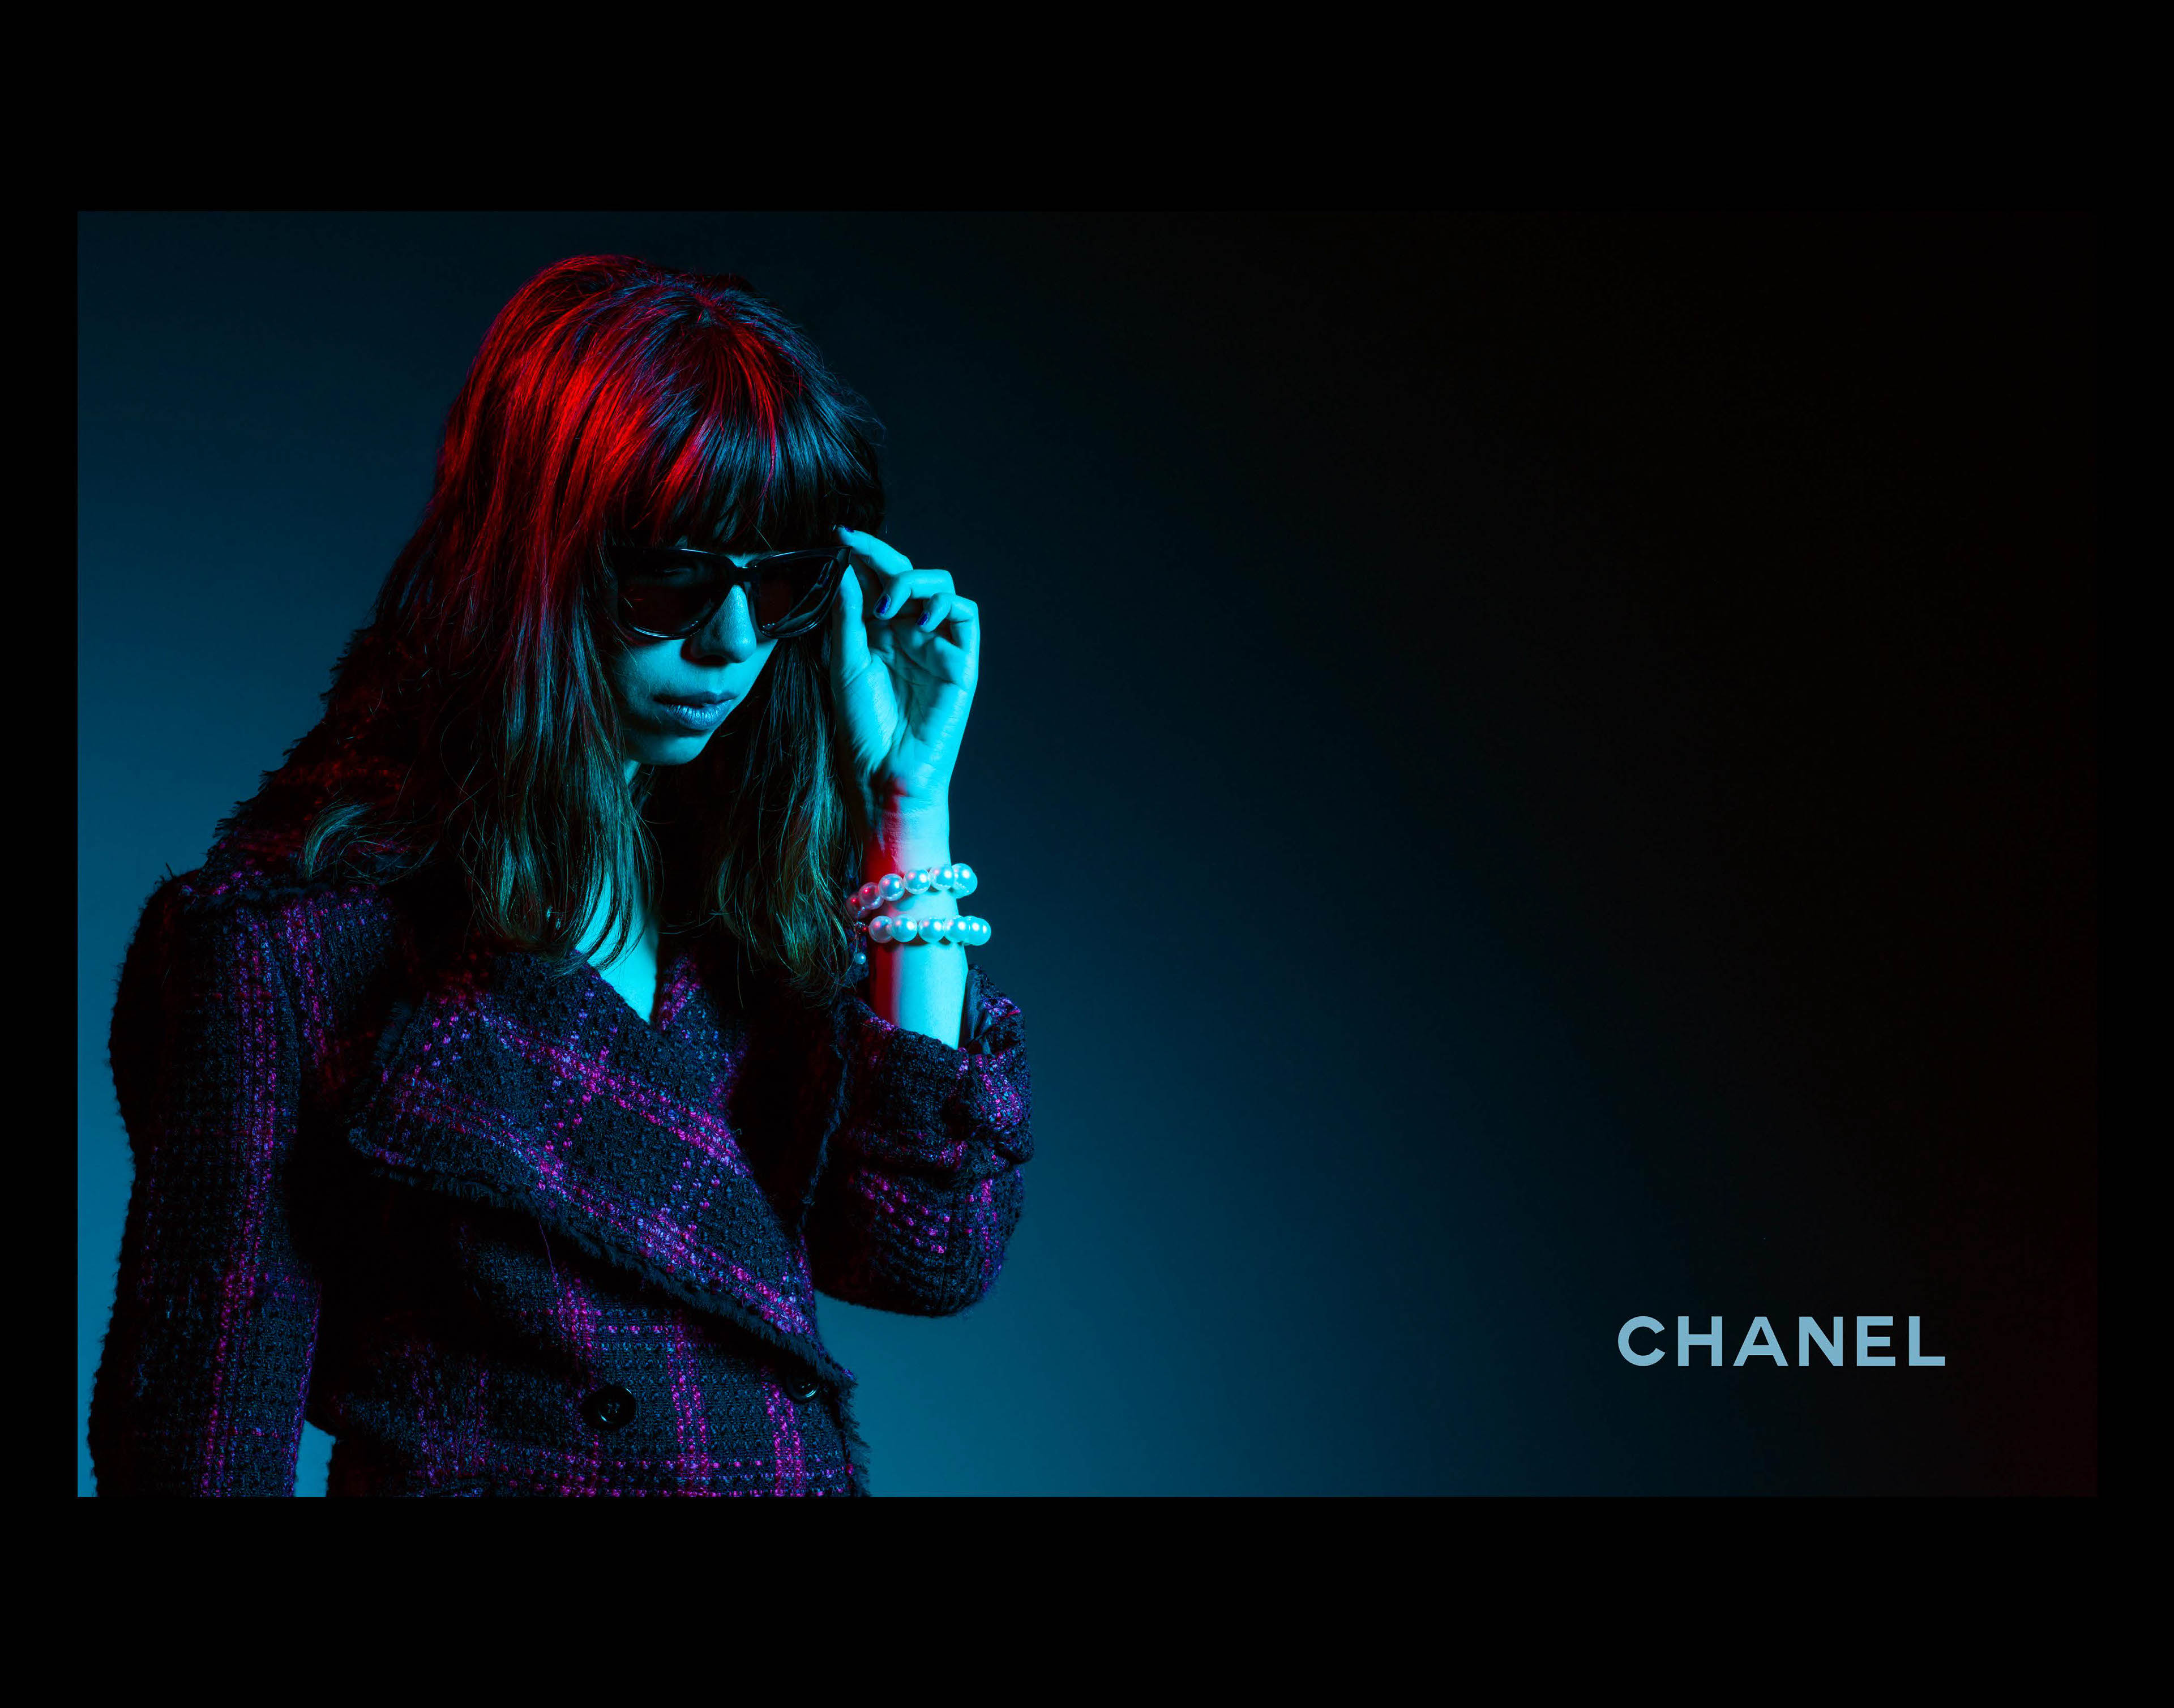 CHANEL - Advertisement Campaign on Behance